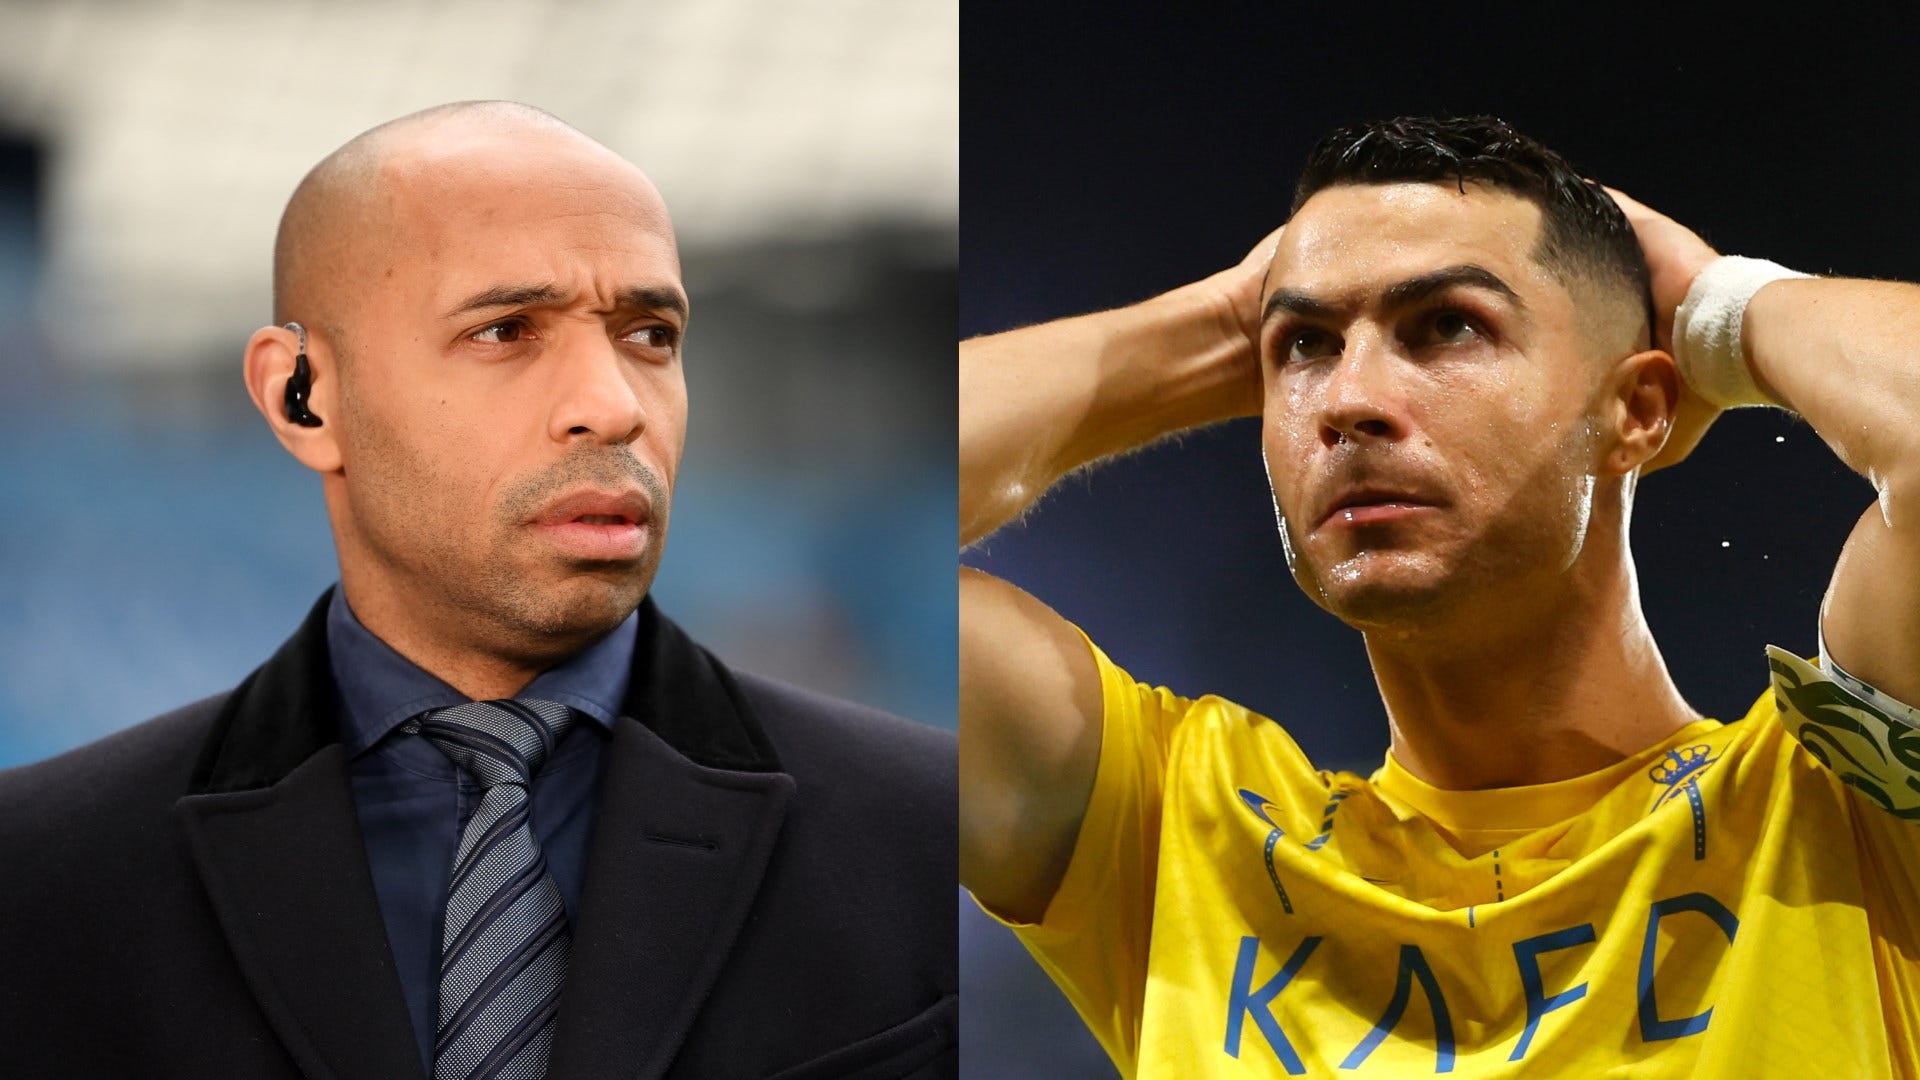 'That's not him!' - Arsenal legend Thierry Henry left stunned by Cristiano Ronaldo's EA FC 24 stats as Al-Nassr superstar slips to lowest rating since FIFA 07